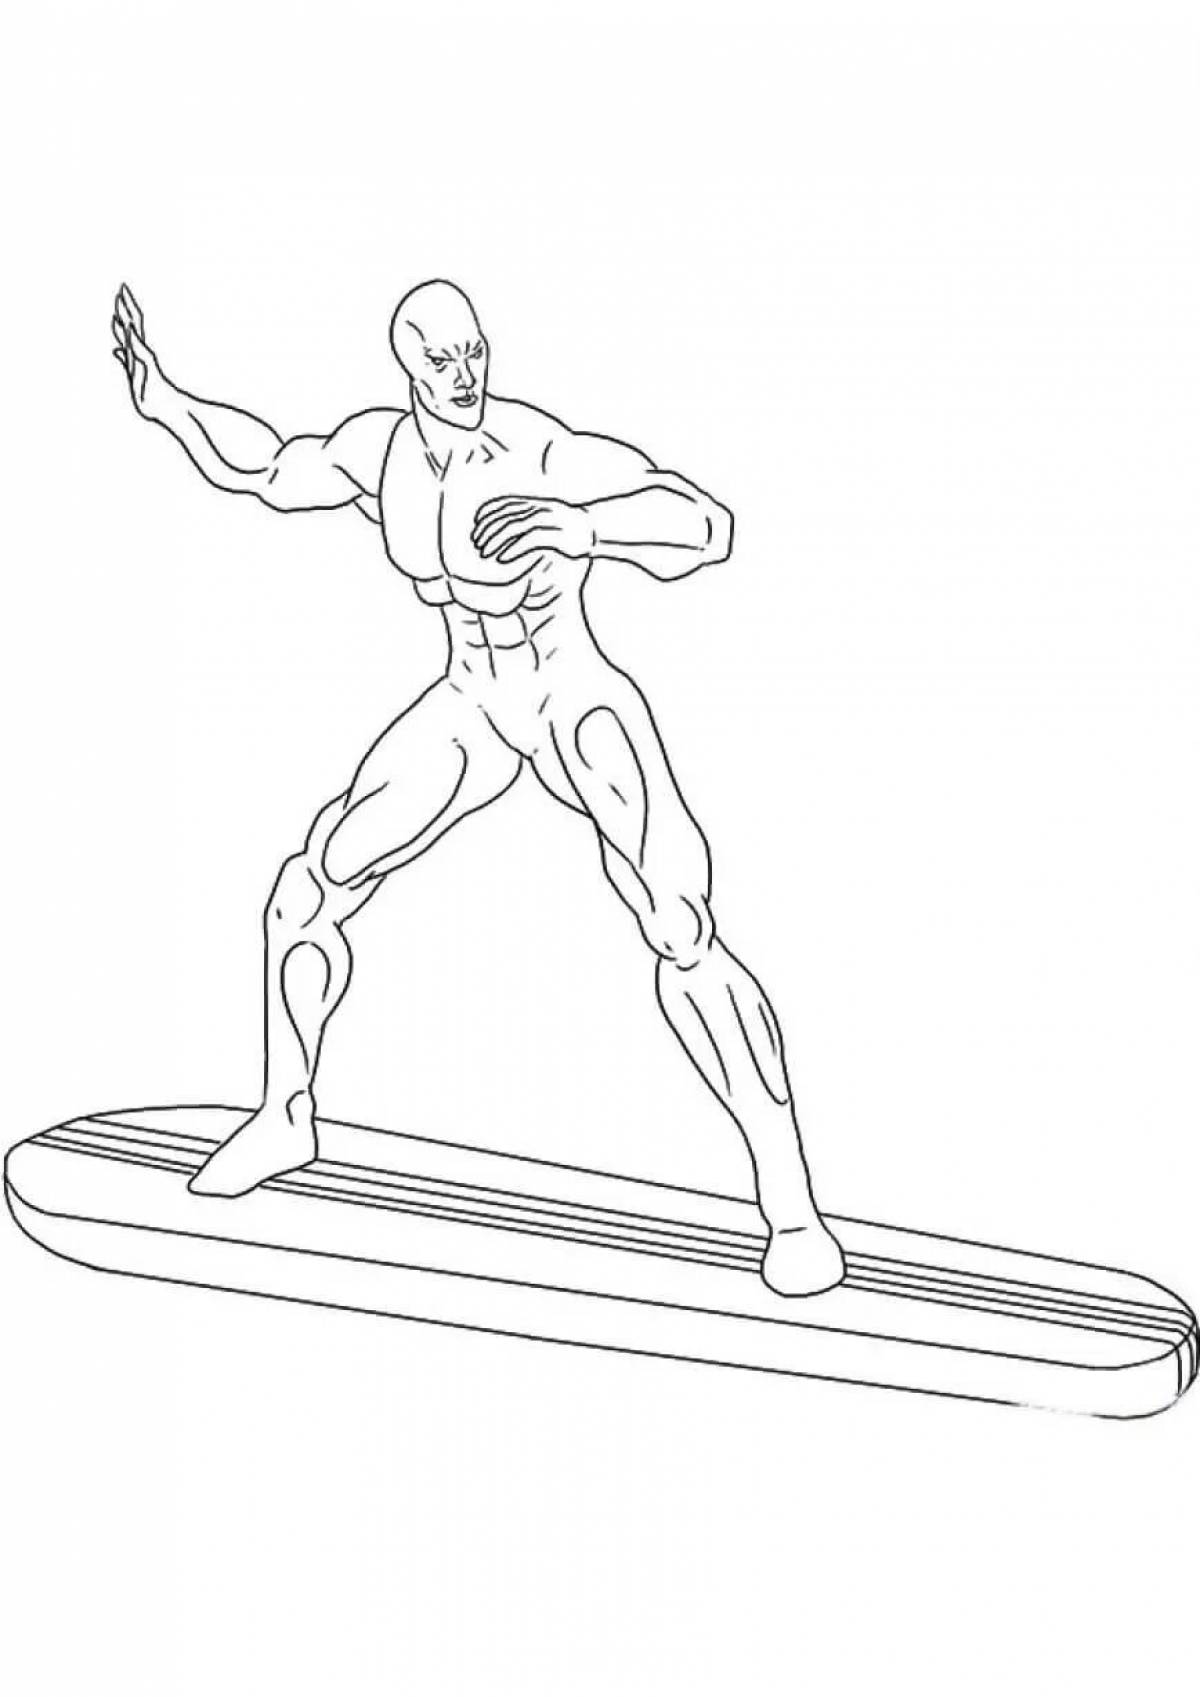 Brilliantly illustrated silver surfer coloring page